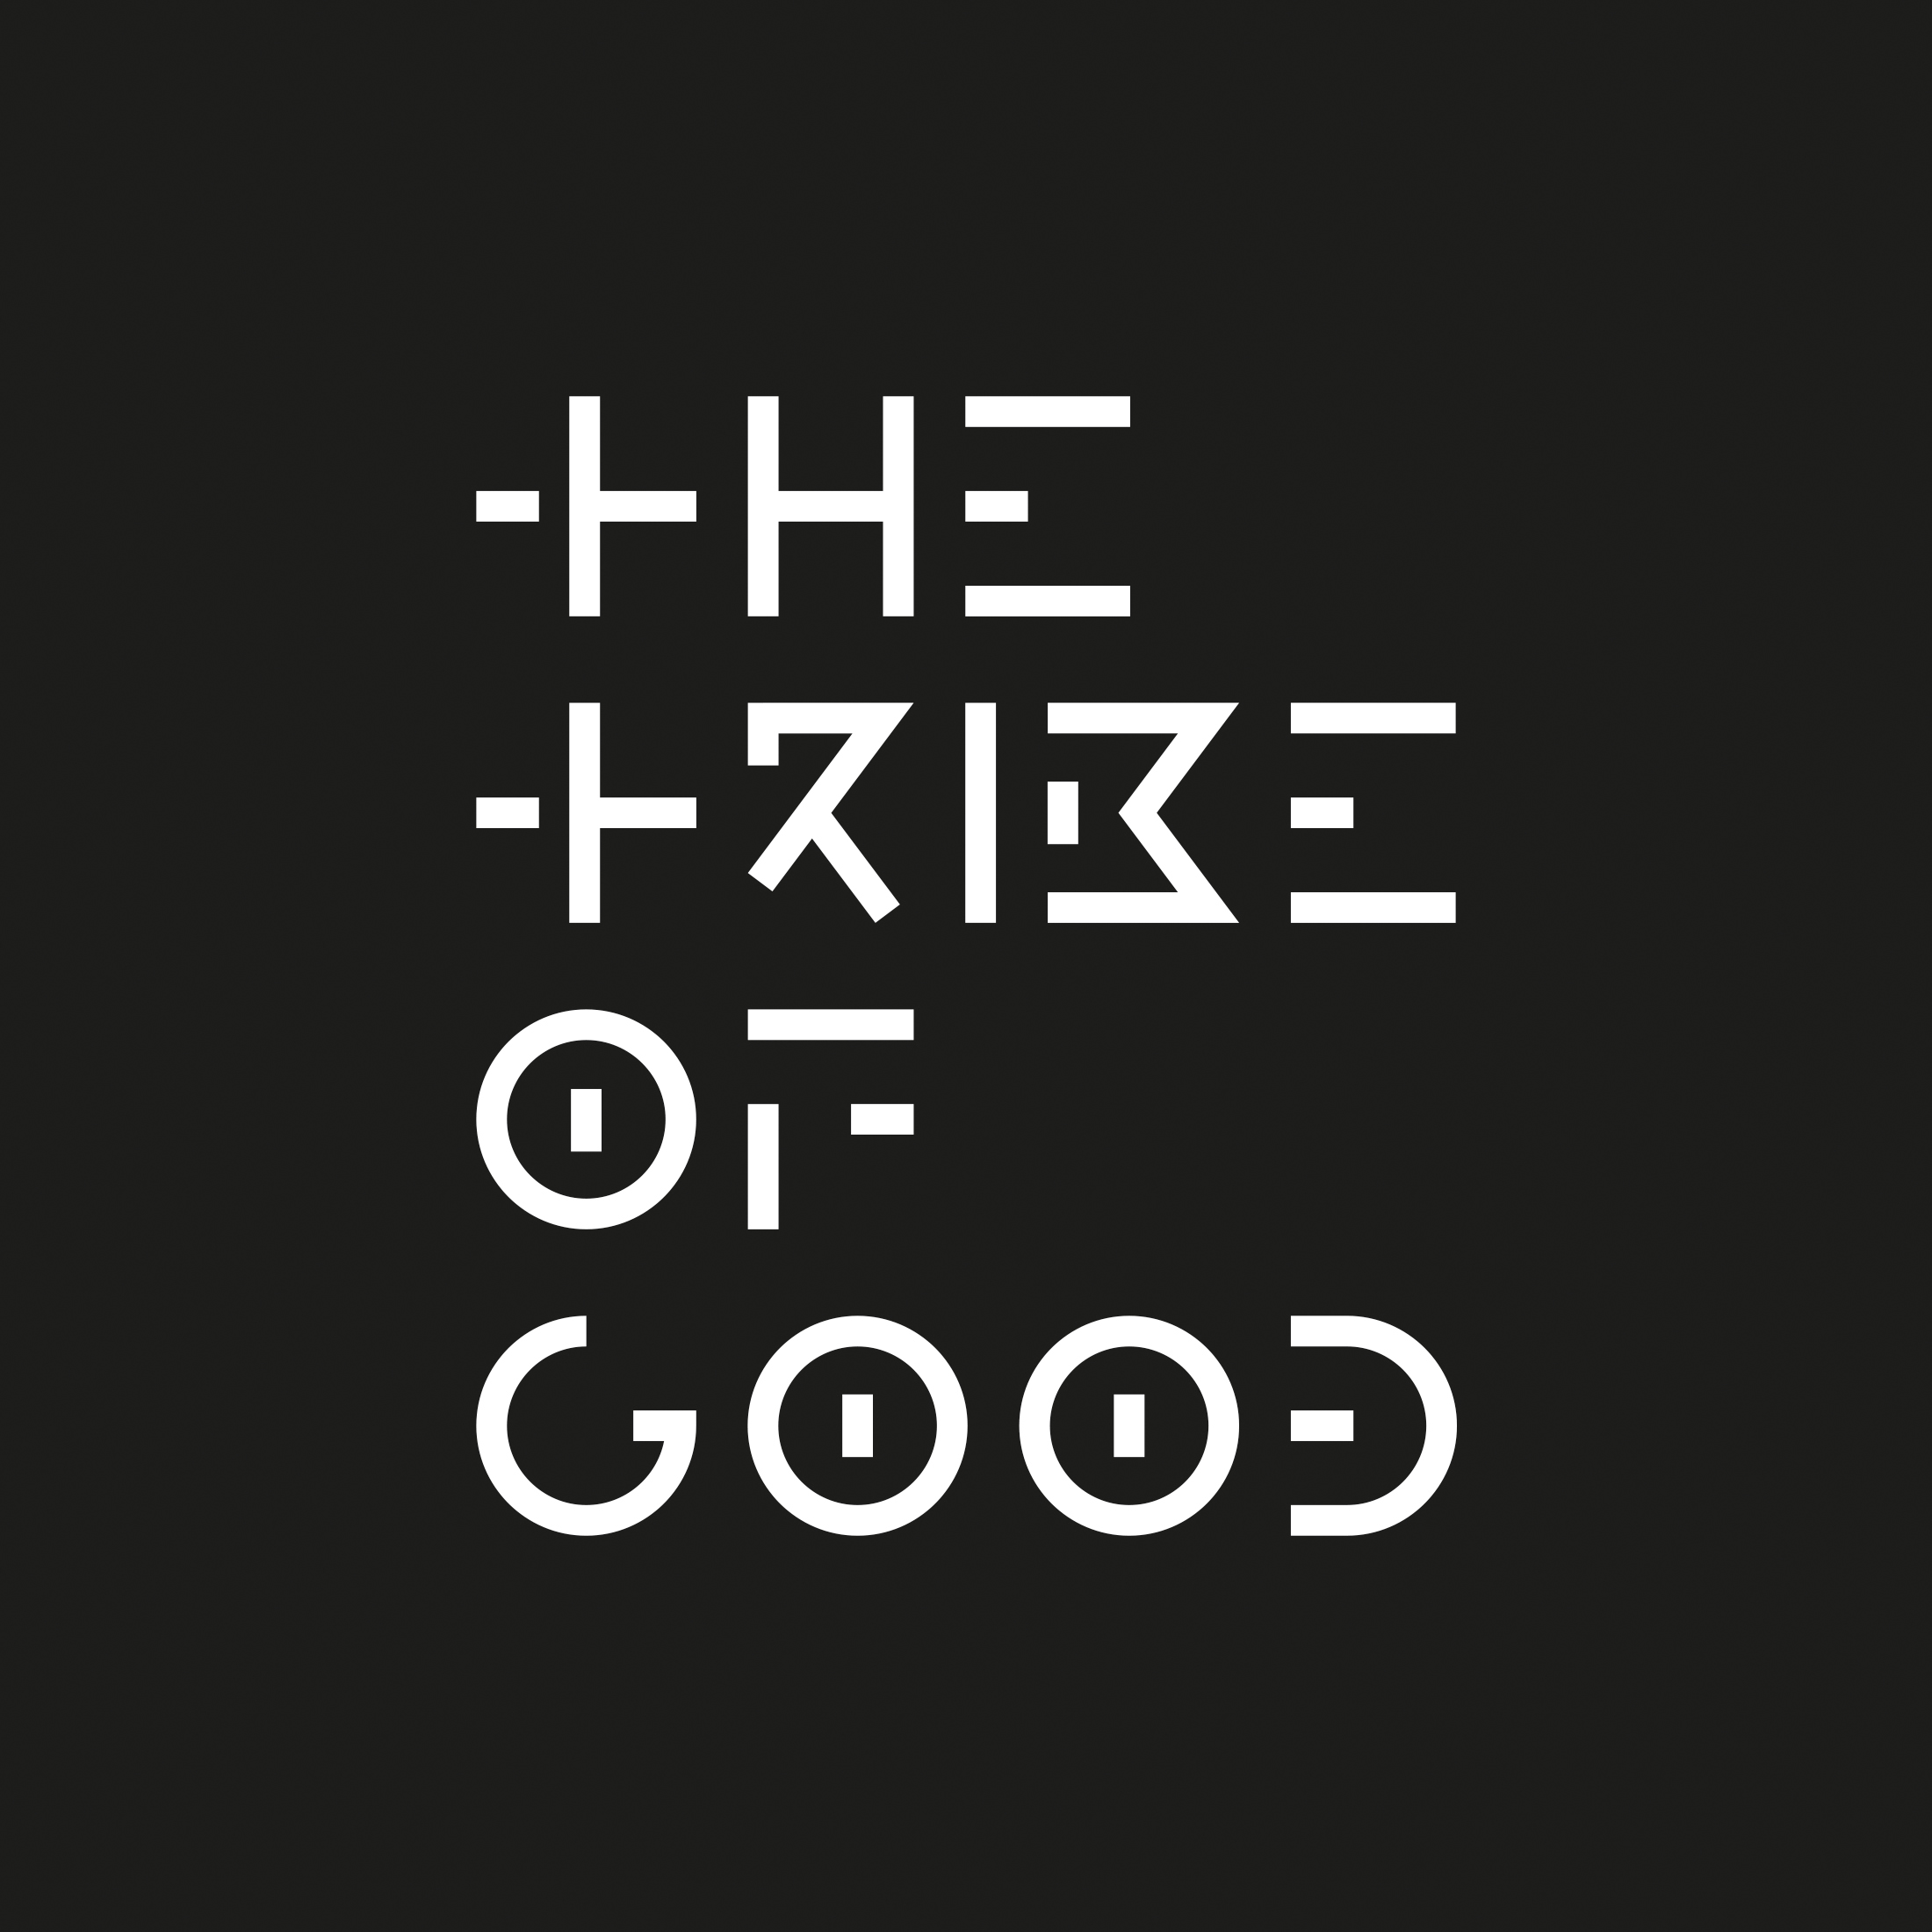 THE TRIBE OF GOOD